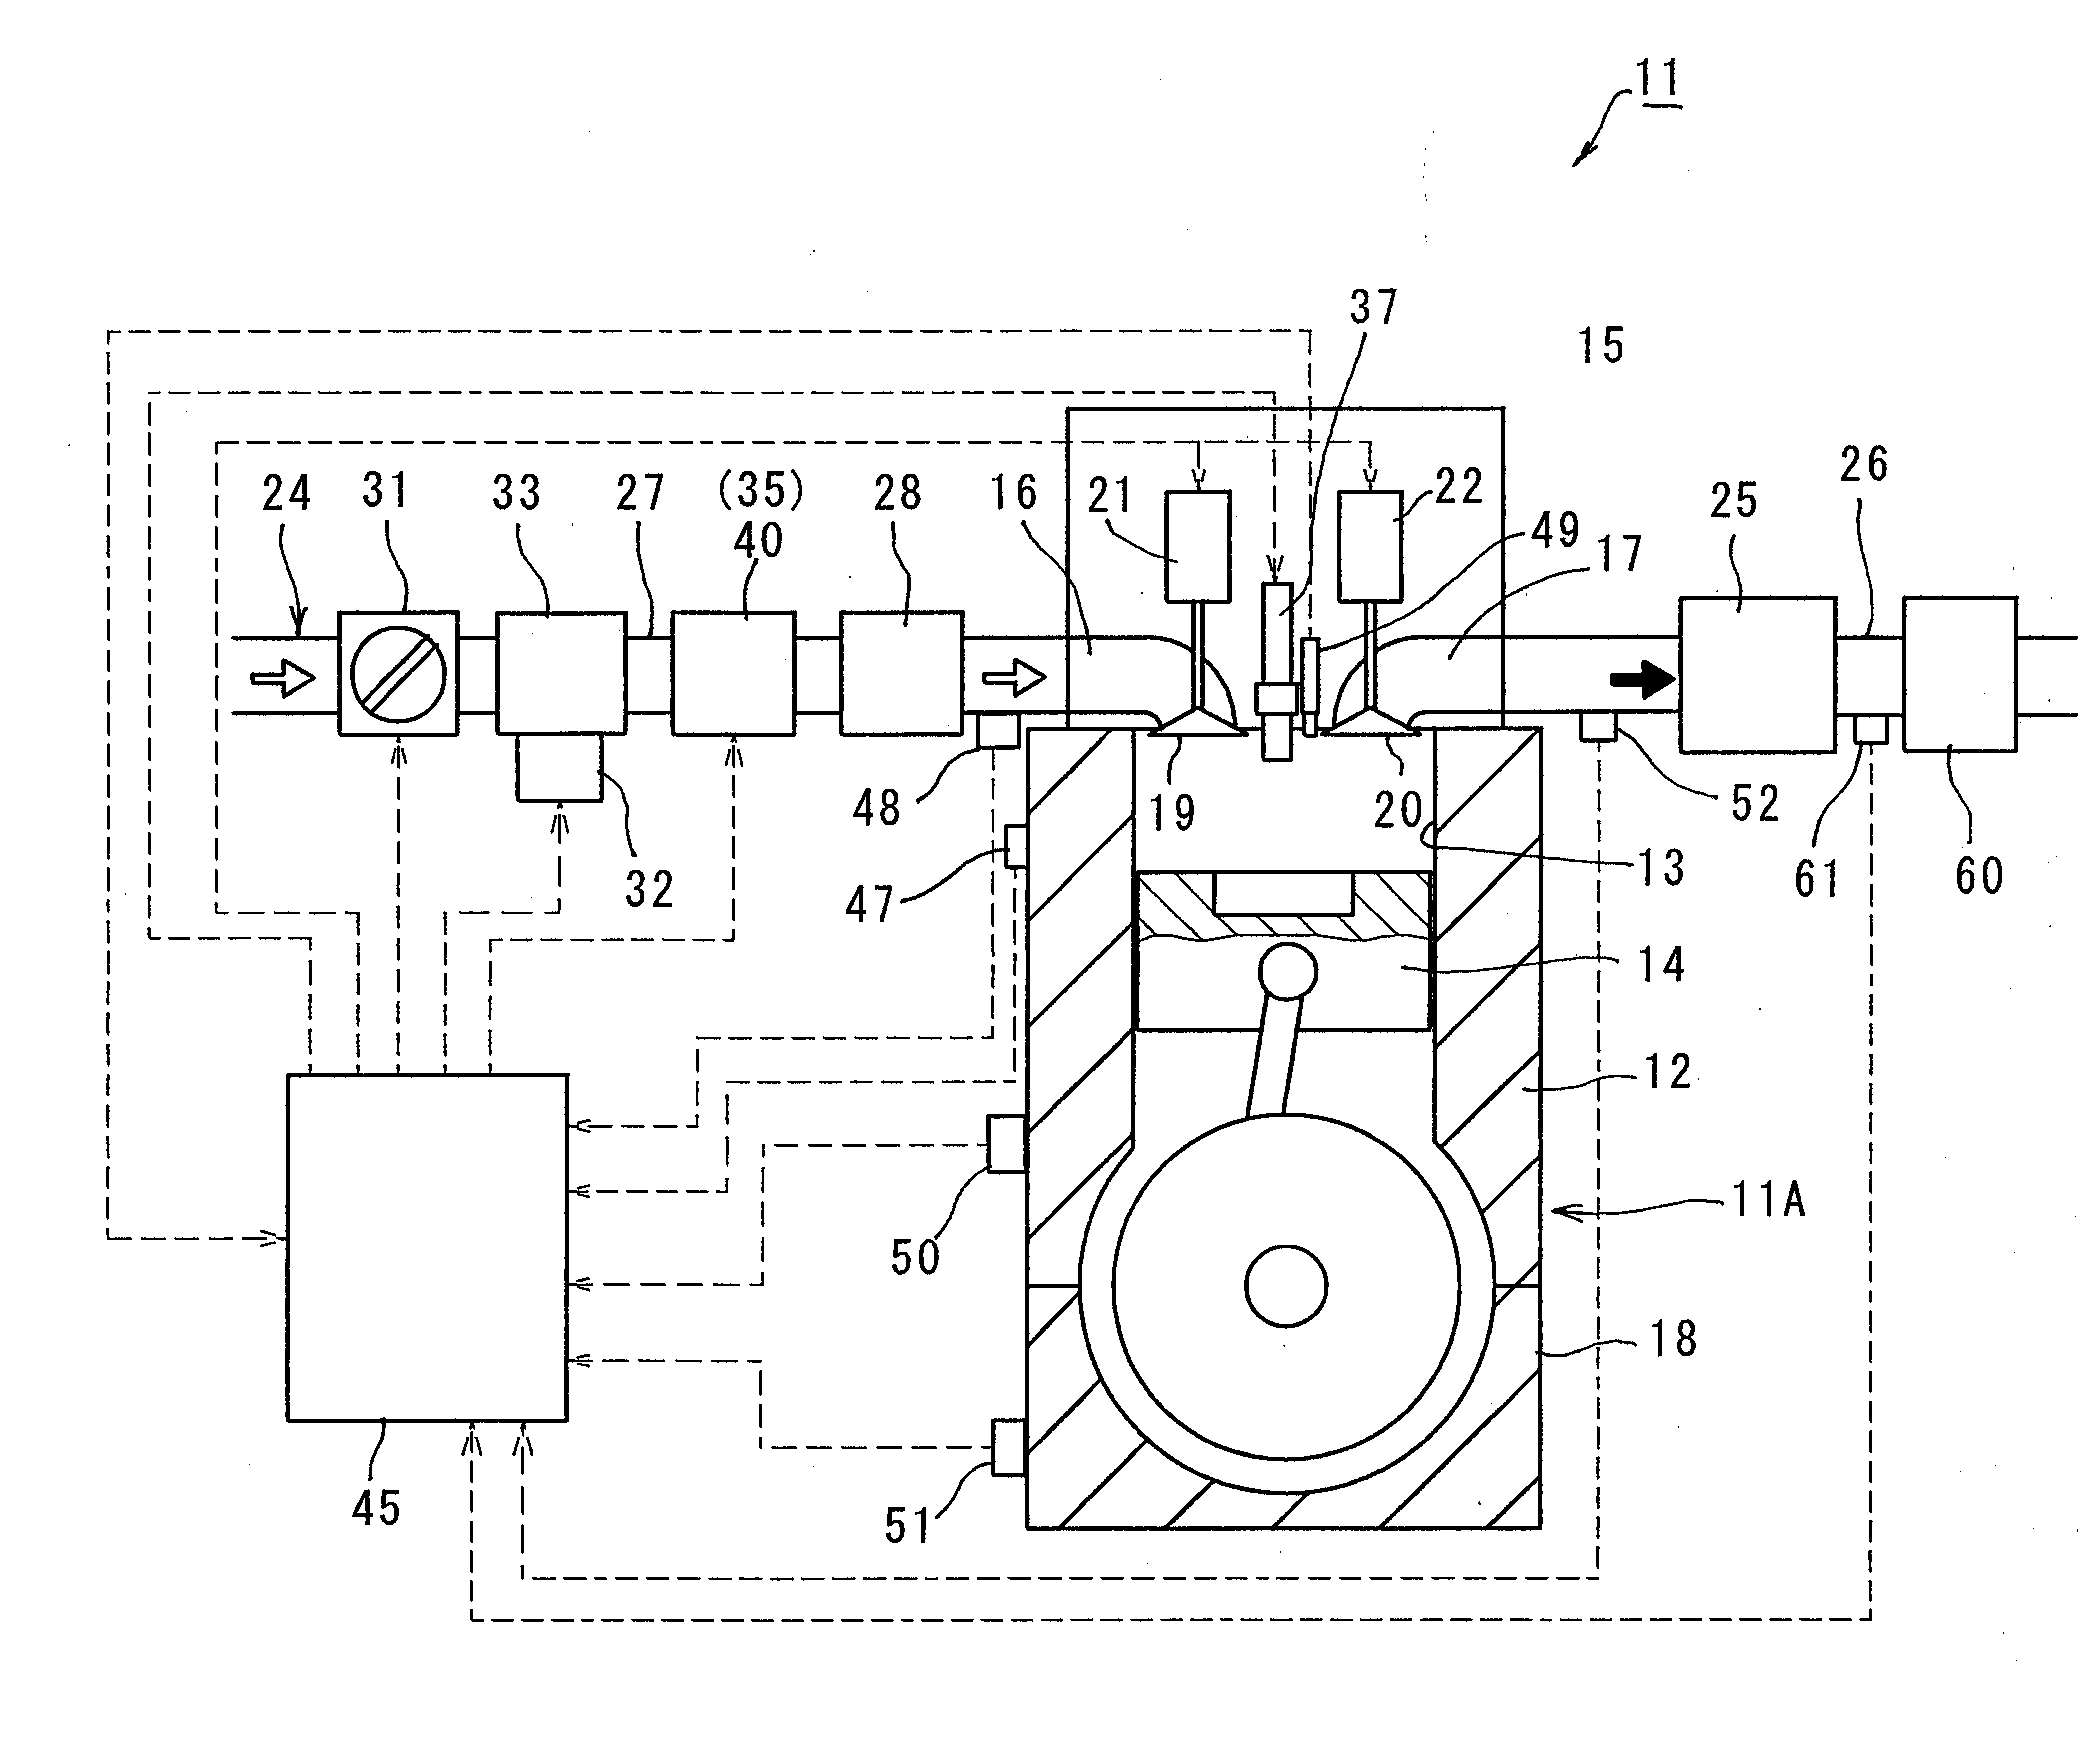 Homogeneous Charge Compressed Ignition Engine Operating Method